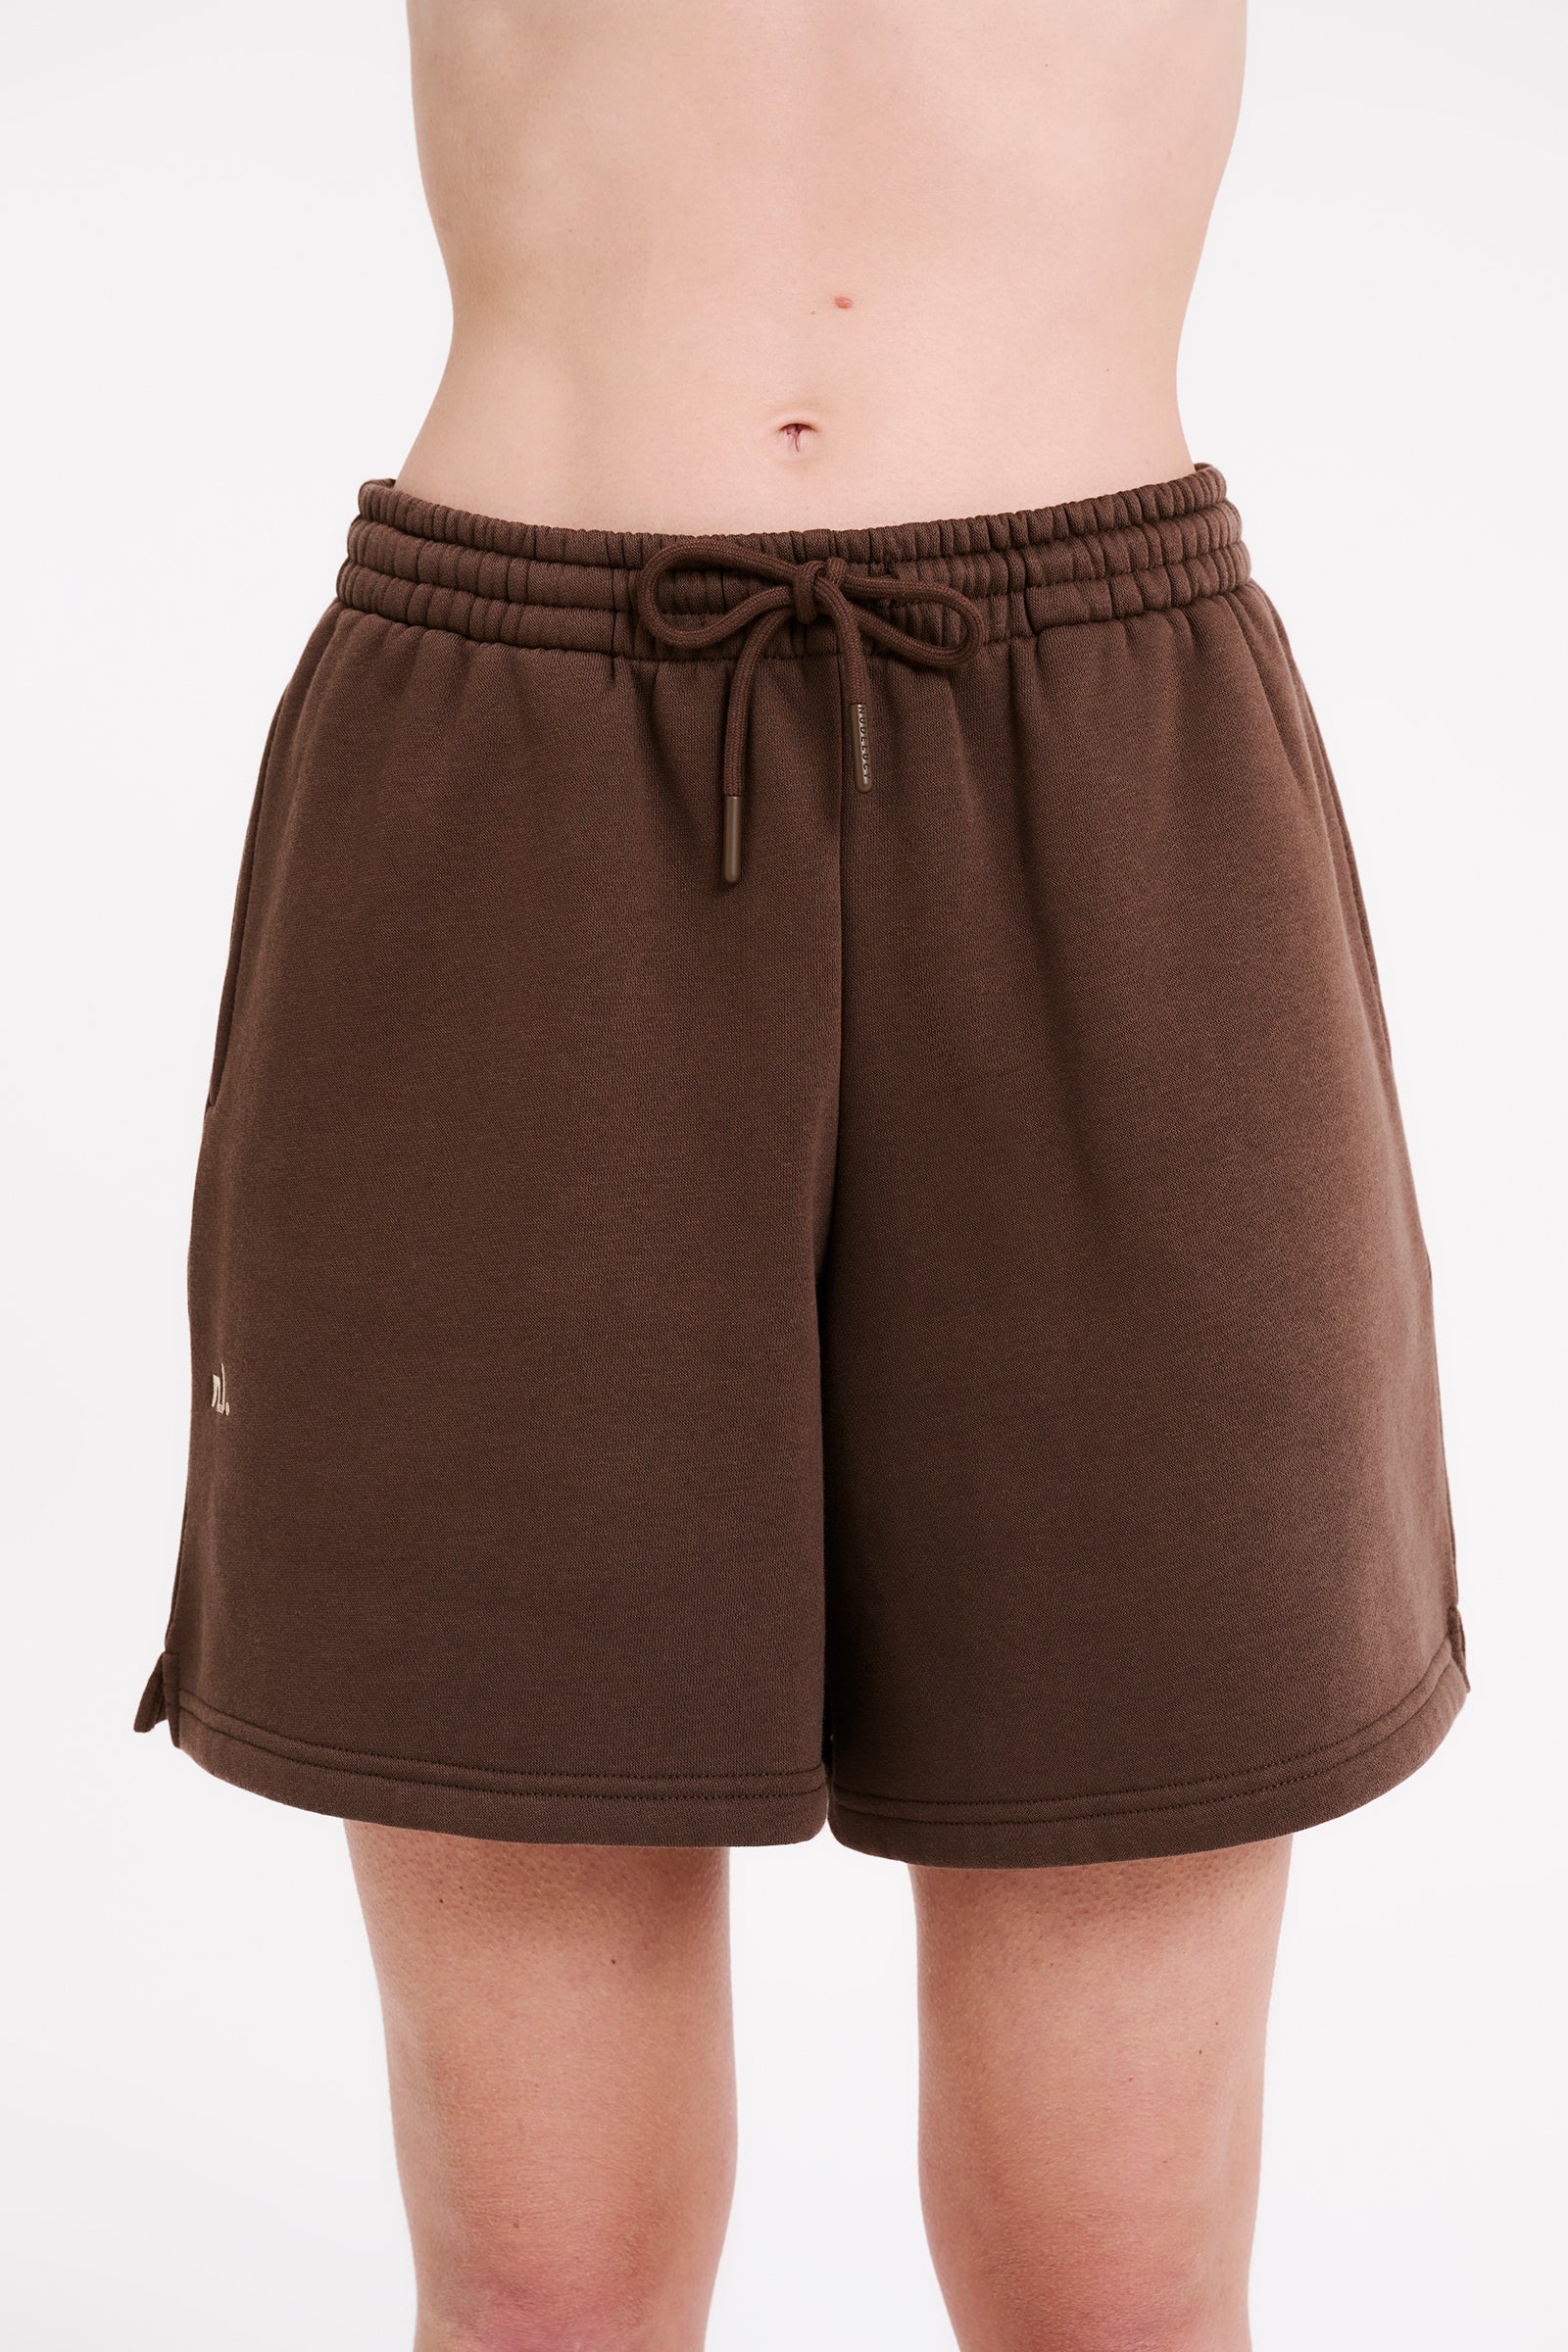 Nude Lucy Carter Curated Short In A Brown Cola Colour 